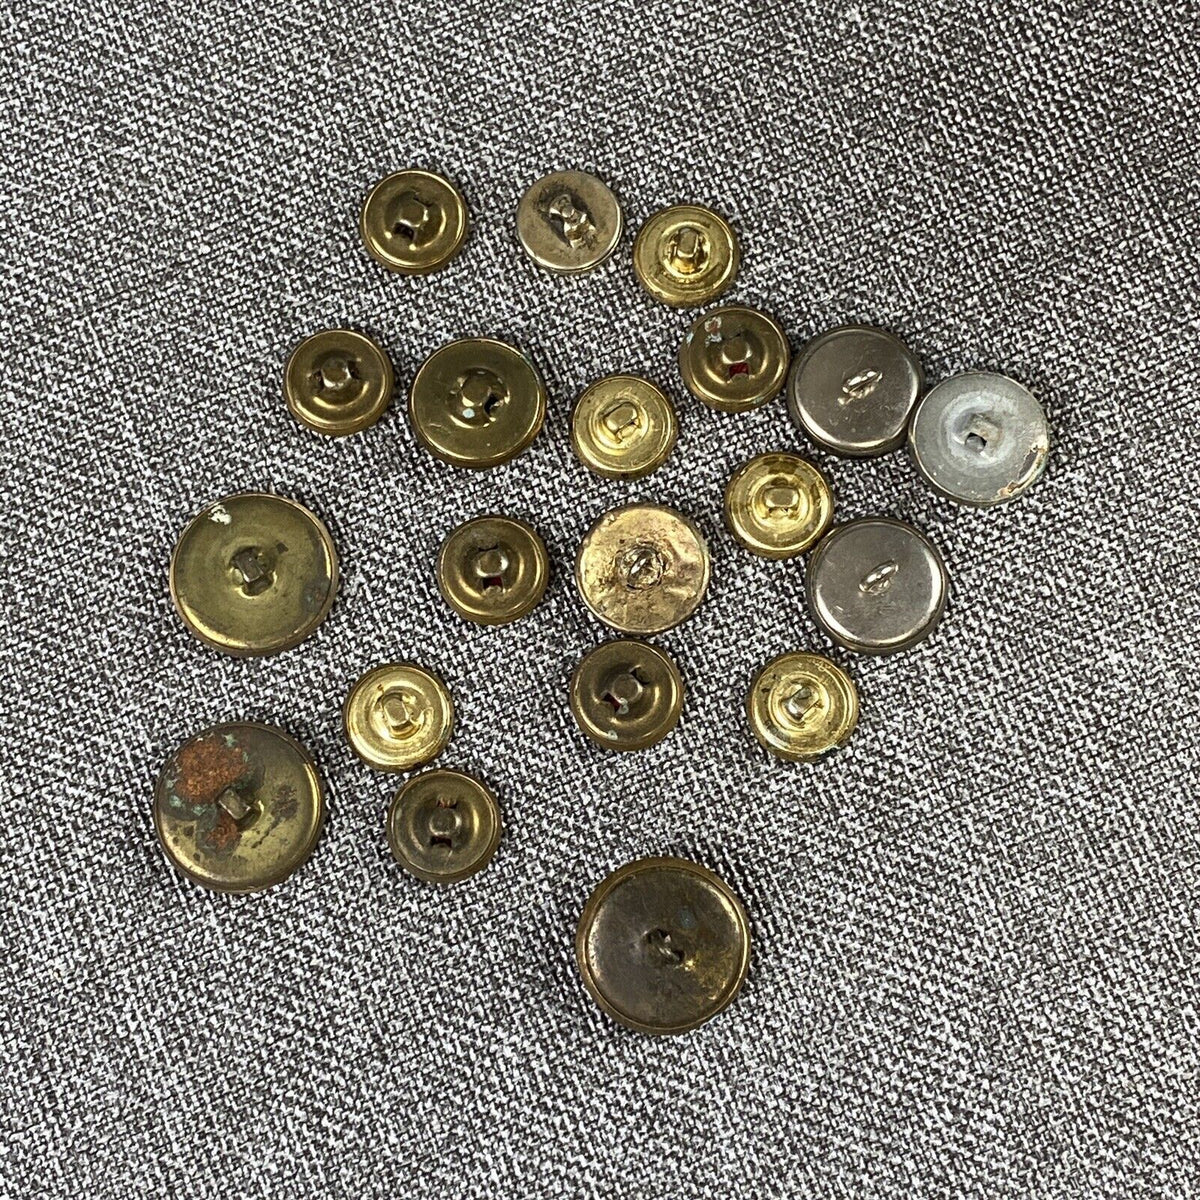 Lot of 18 Vintage Metal Shank Buttons, Rounded and Flat Styles, Military Style